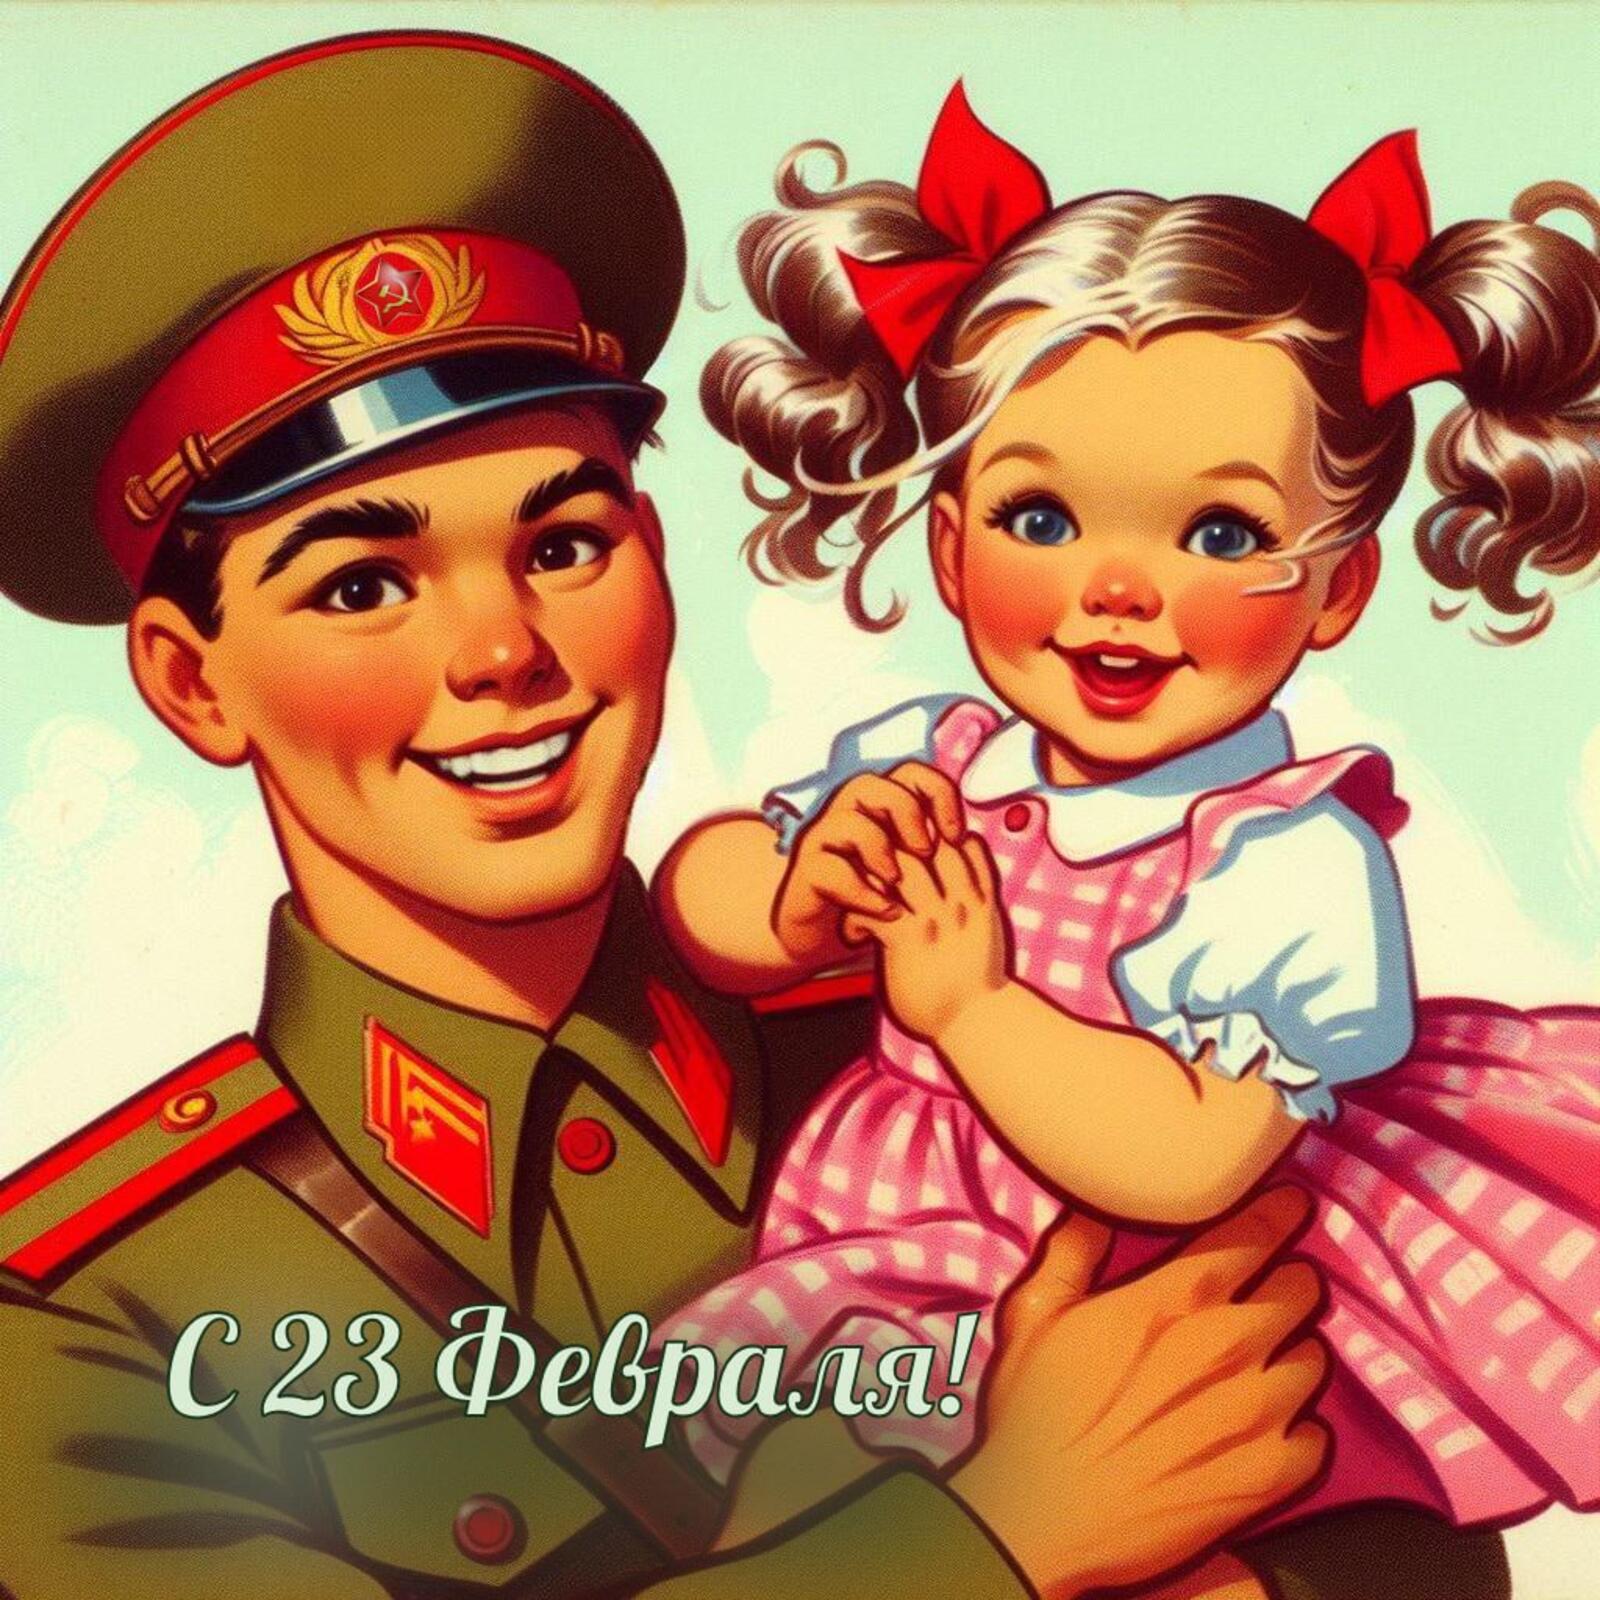 Happy February 23rd vintage postcard with USSR soldier